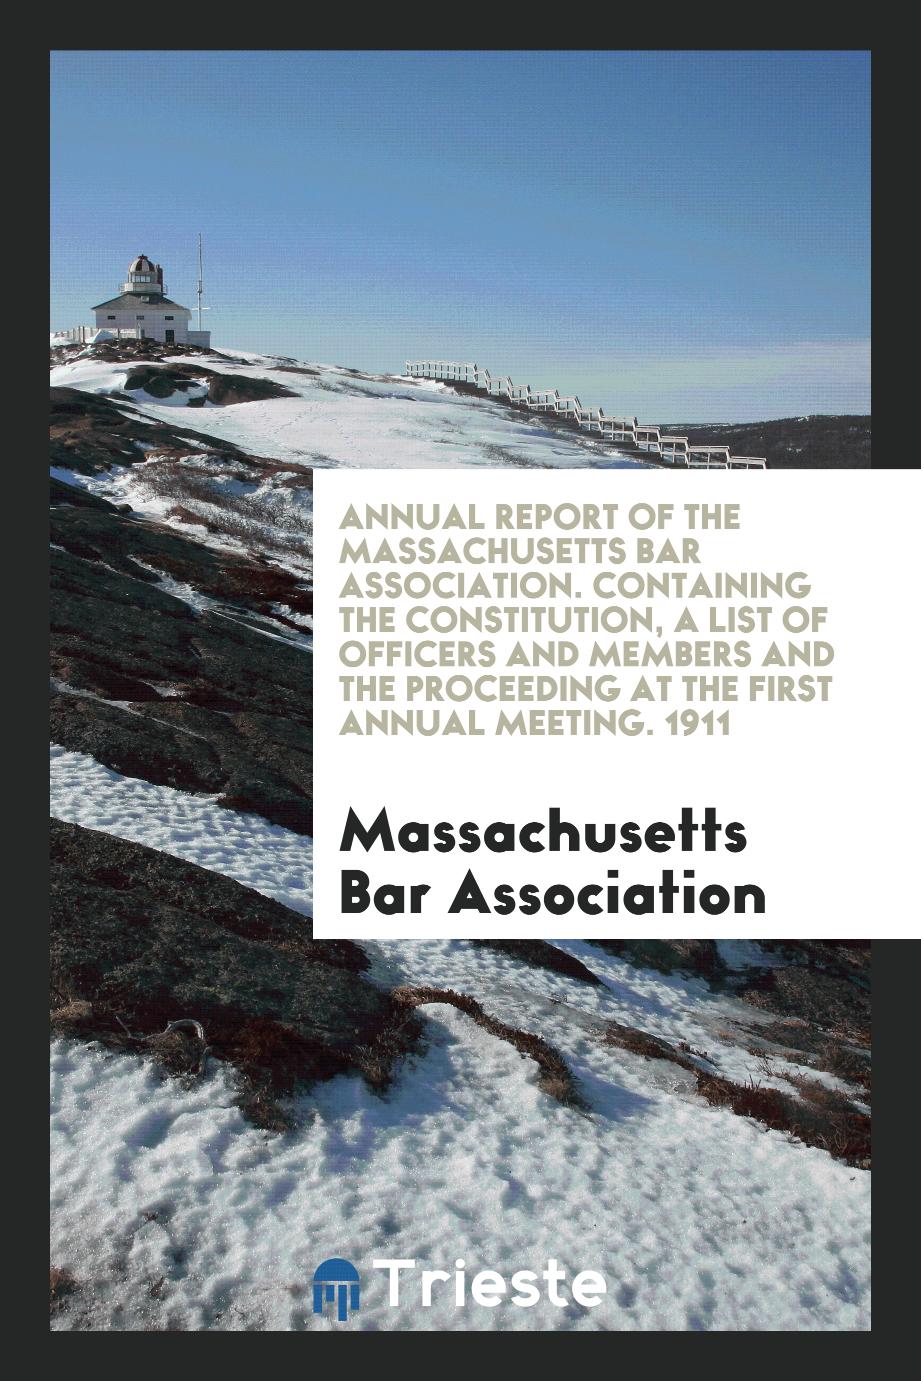 Annual Report of the Massachusetts Bar Association. Containing the Constitution, a List of Officers and Members and the Proceeding at the First Annual Meeting. 1911